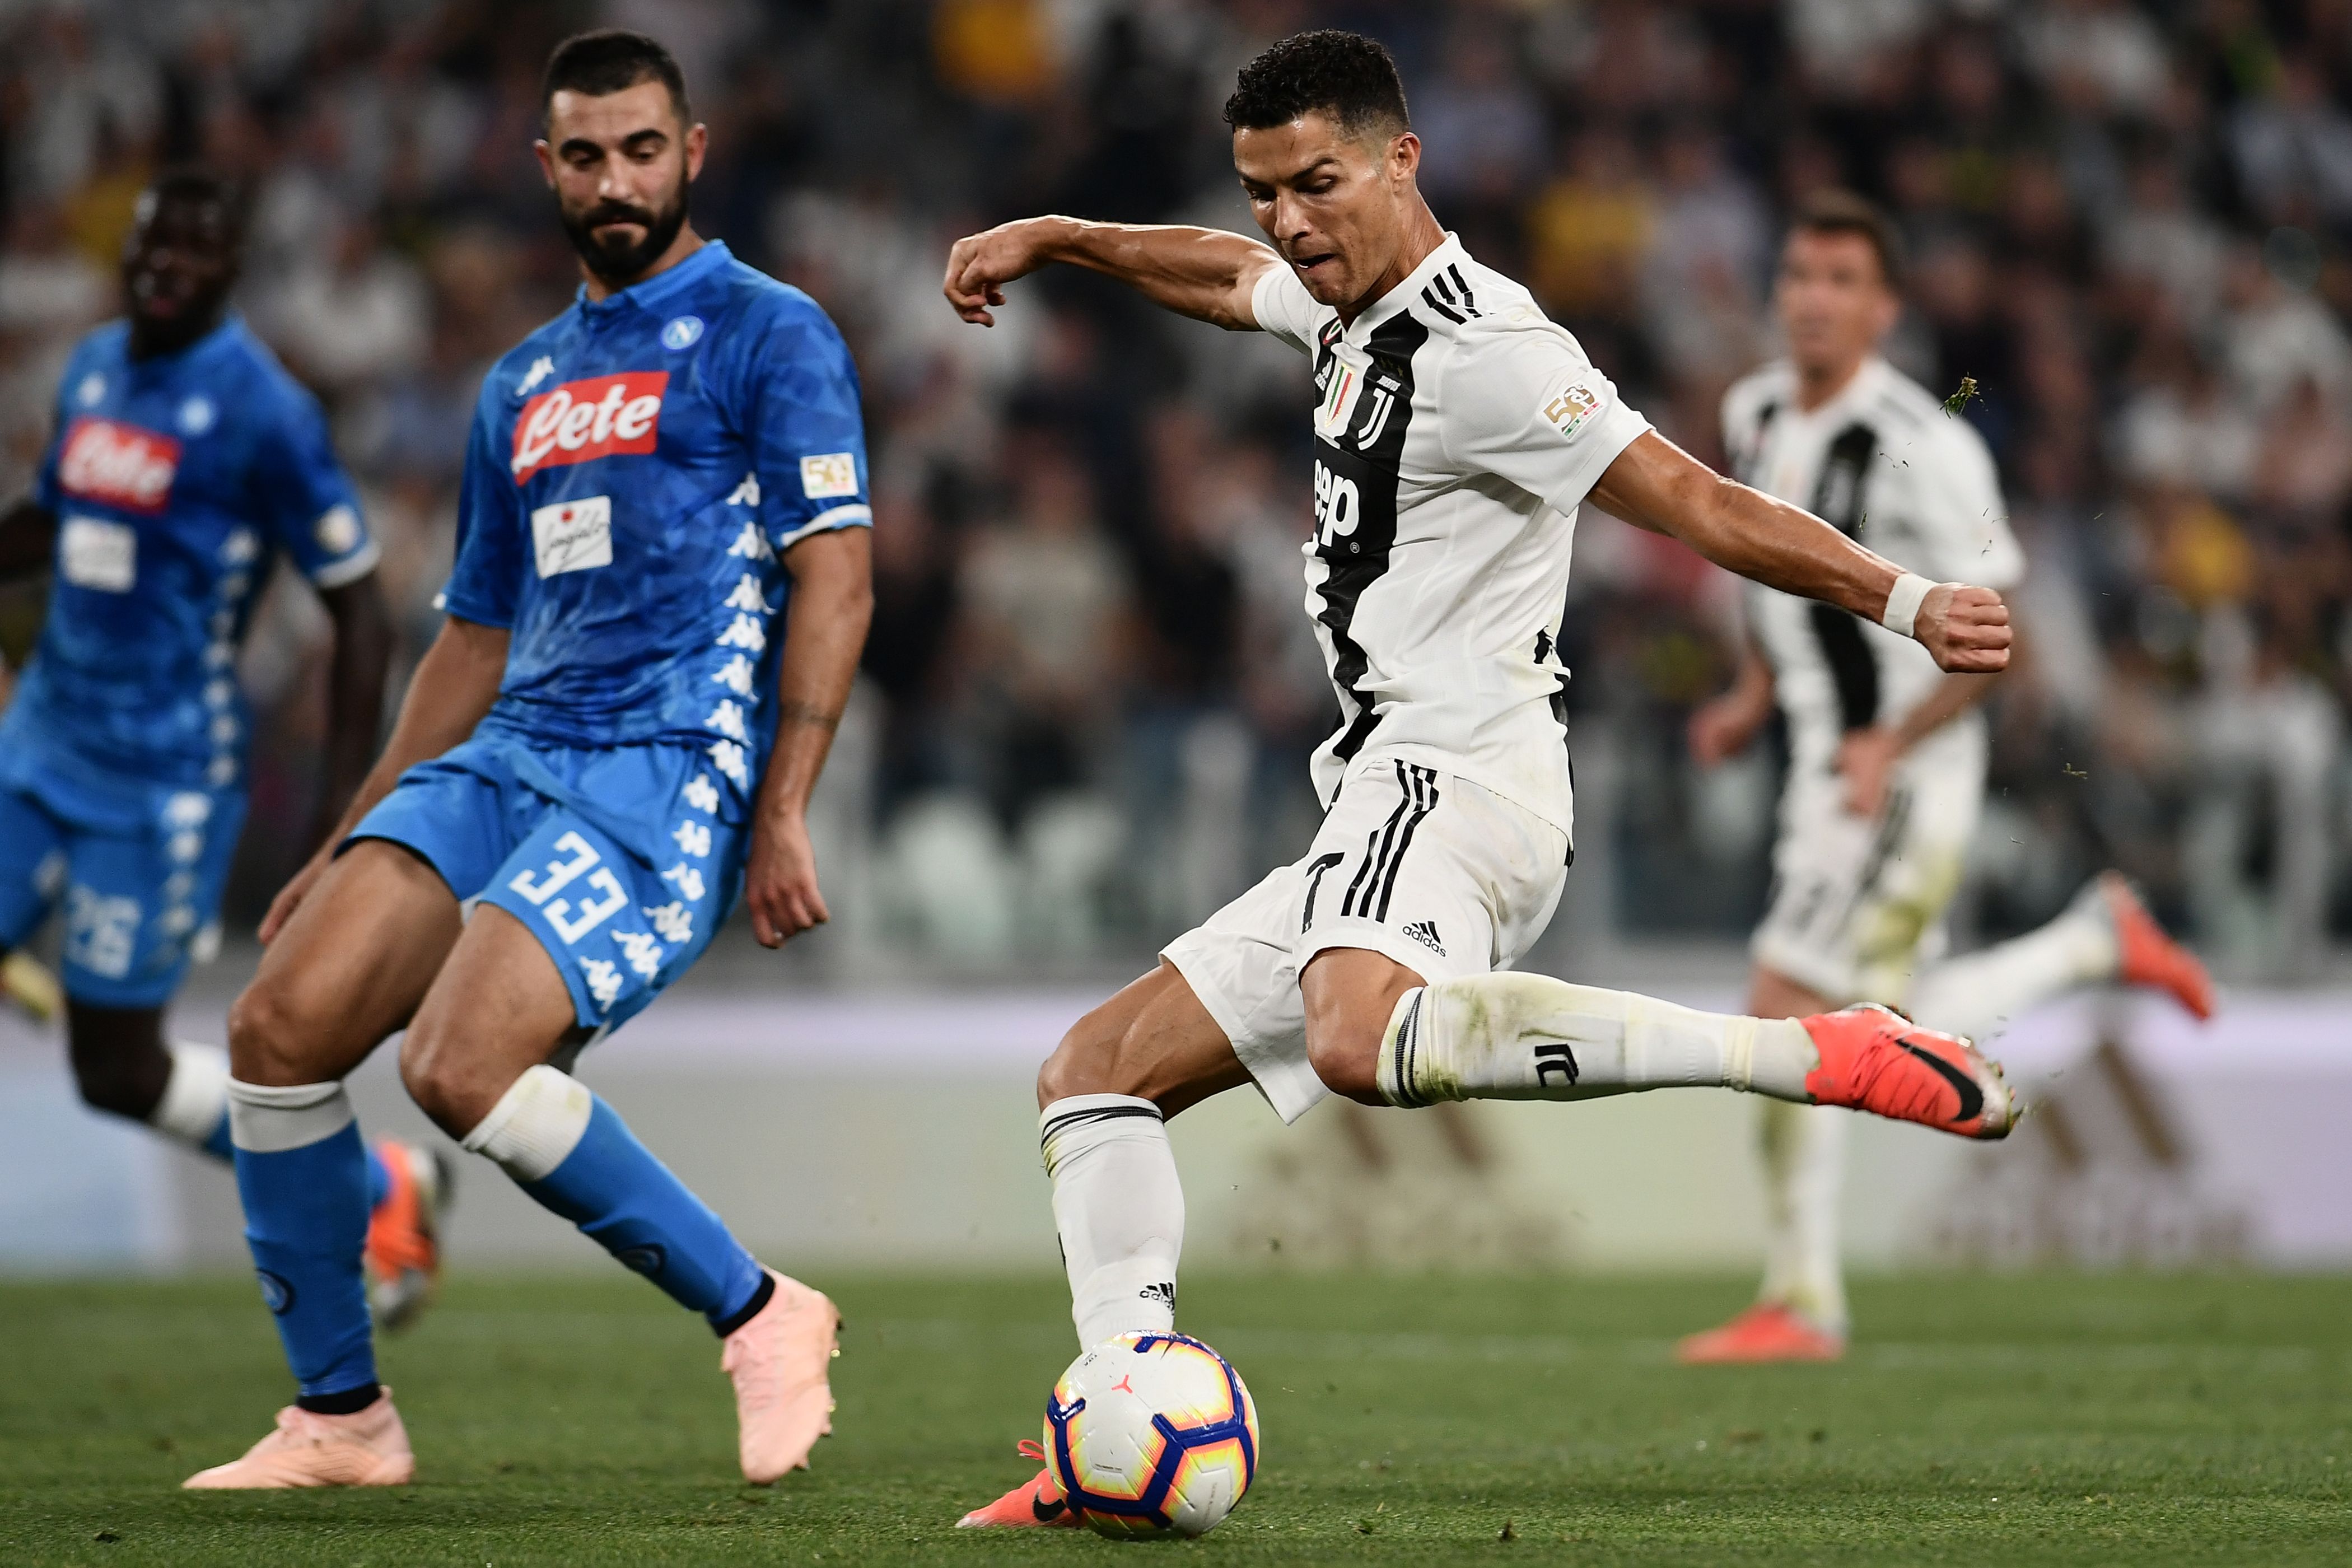 How To Live Stream Juventus vs Napoli Online With ESPN+ - BroBible